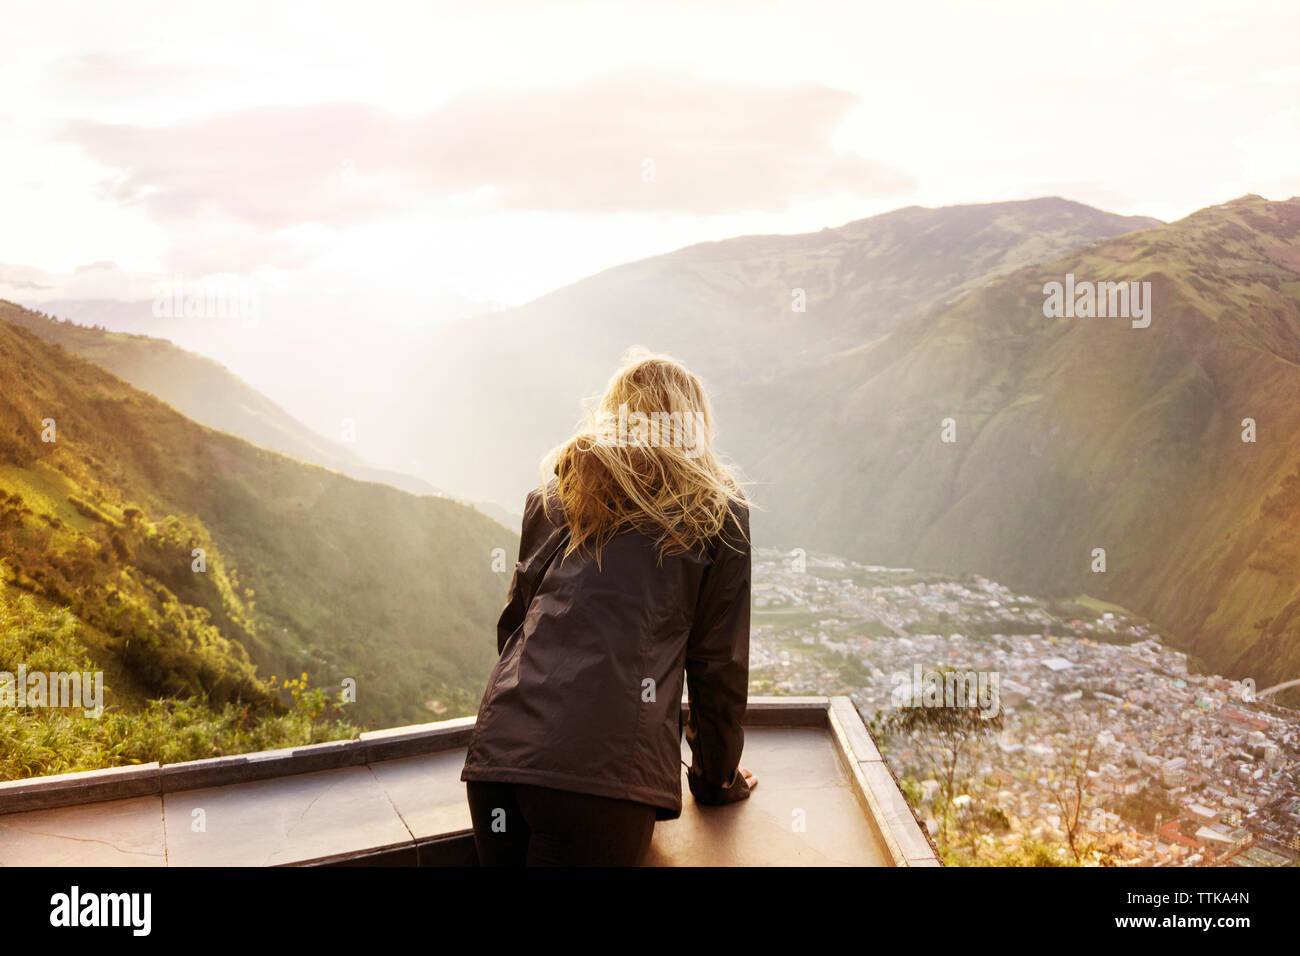 Rear view of woman standing at observation point against mountains and sky Stock Photo